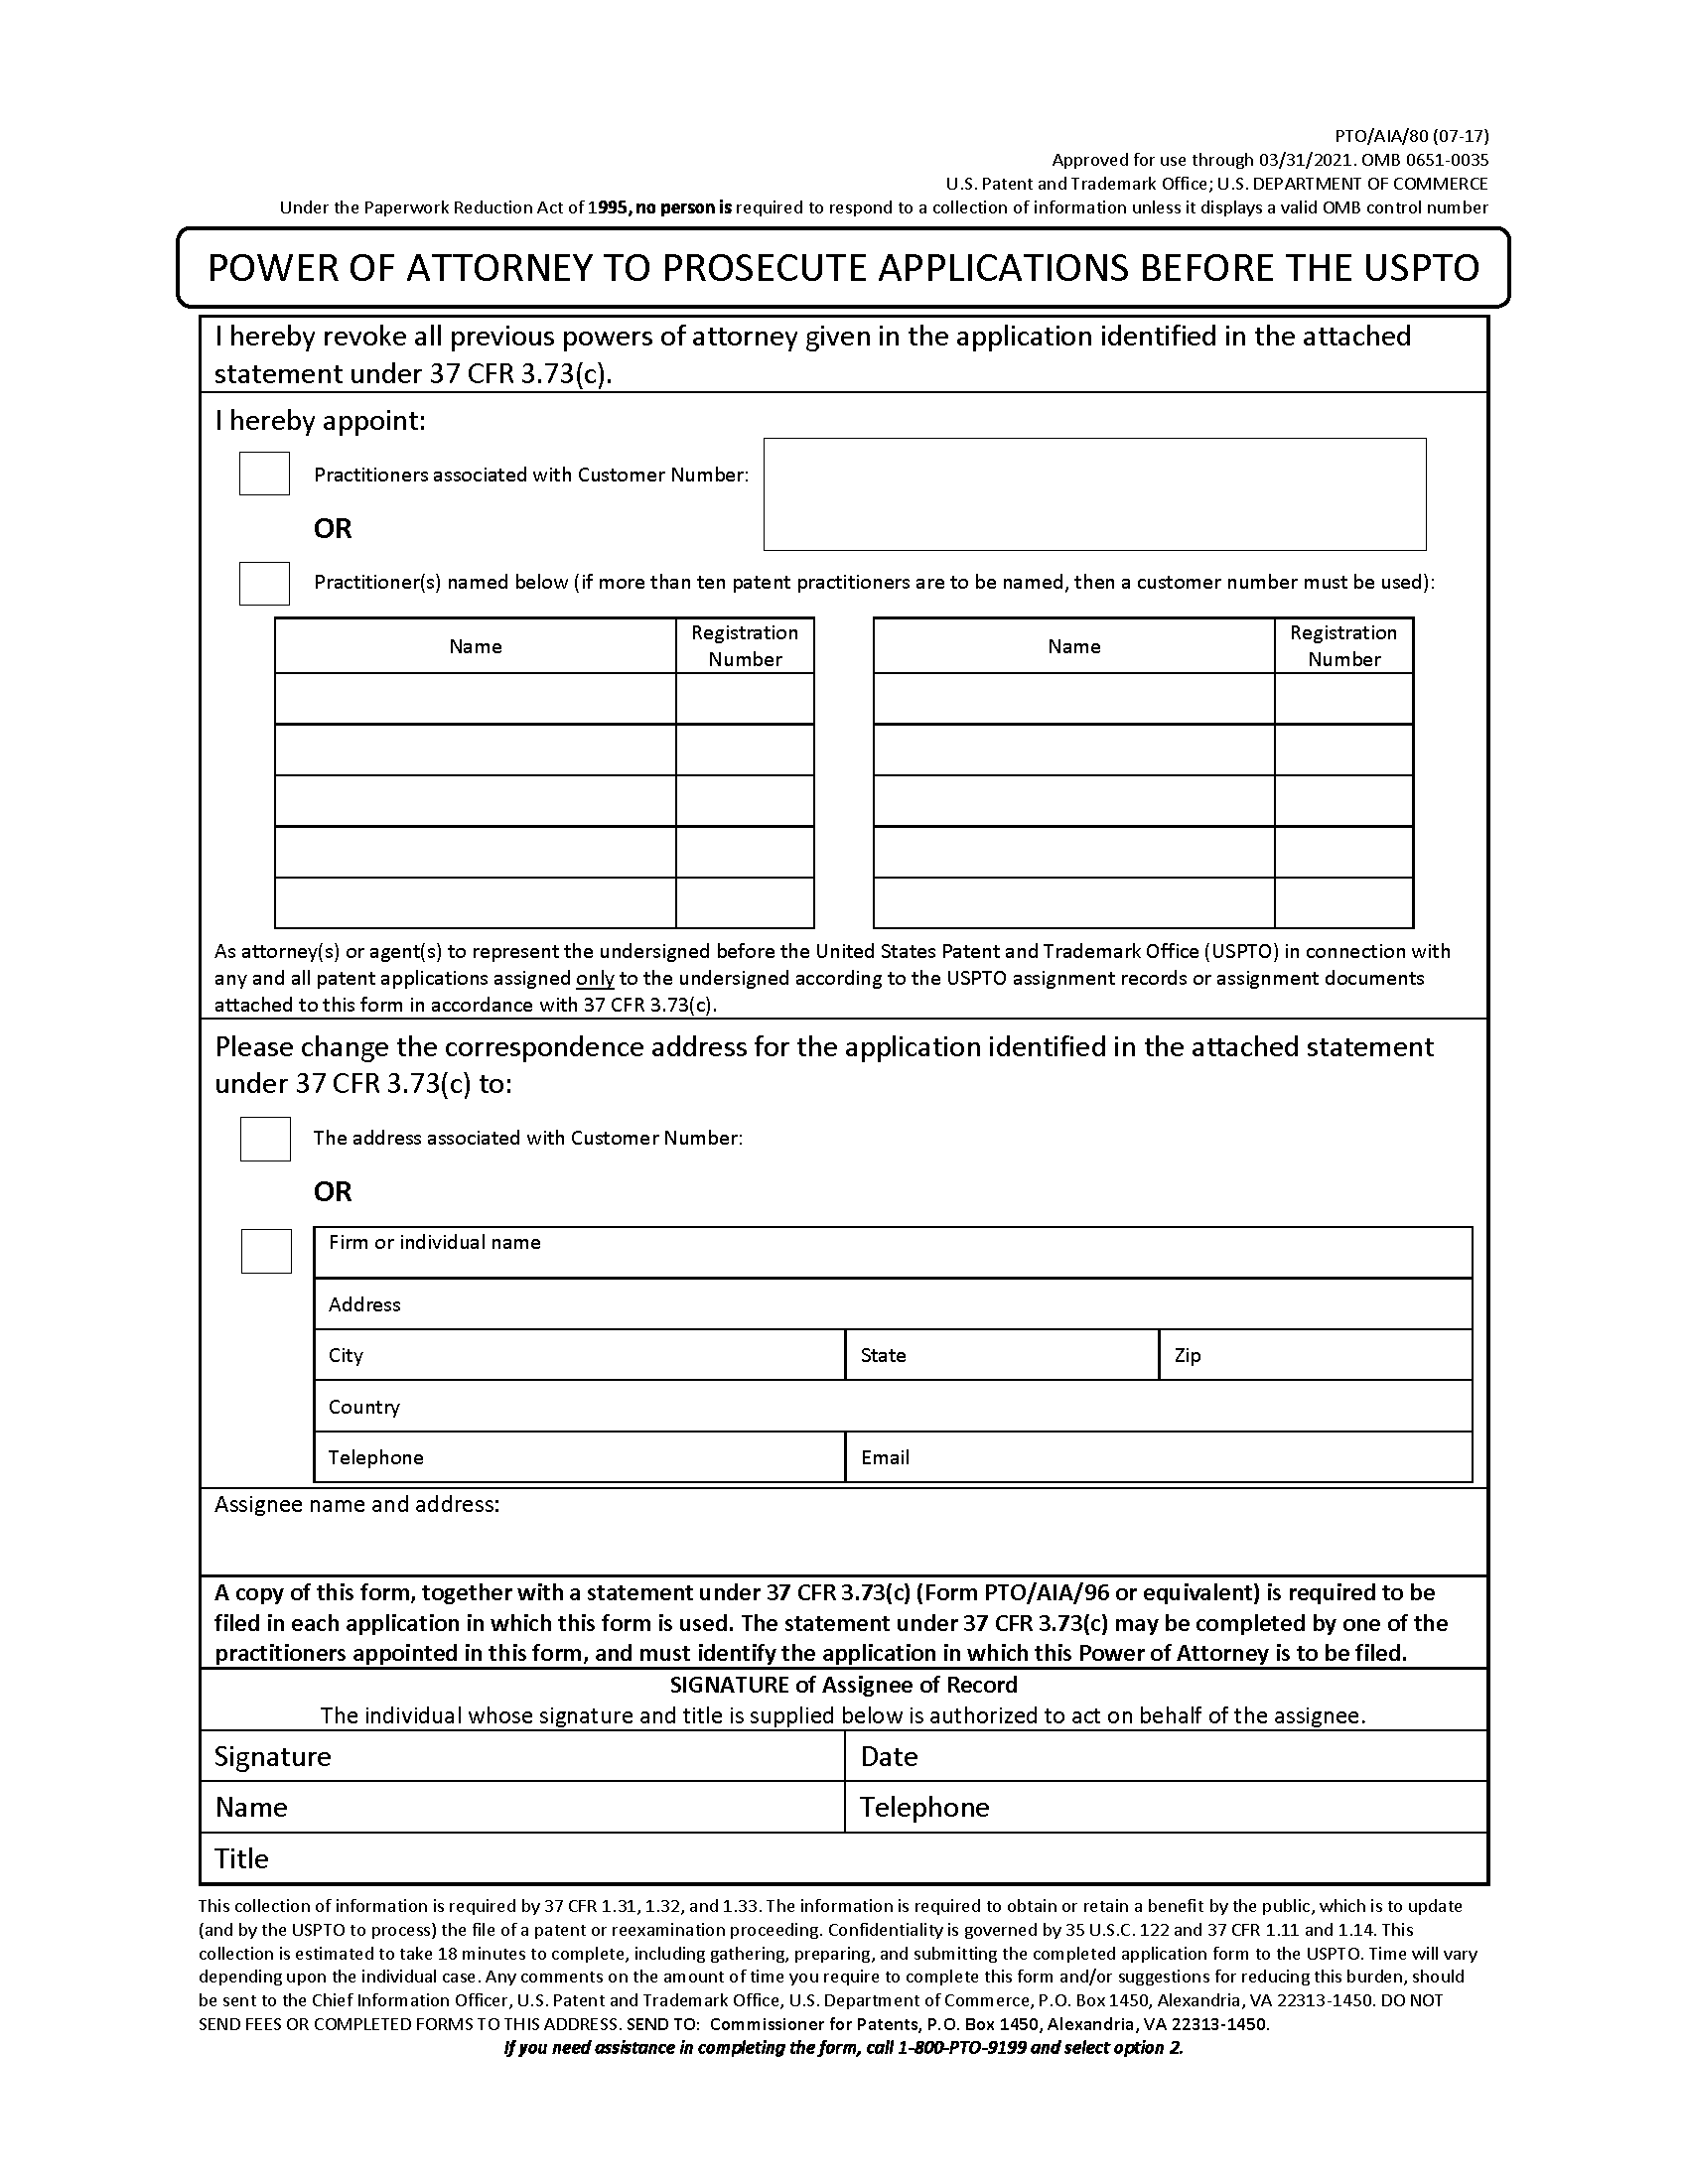 Power of Attorney form PTO/AIA/80 page 1